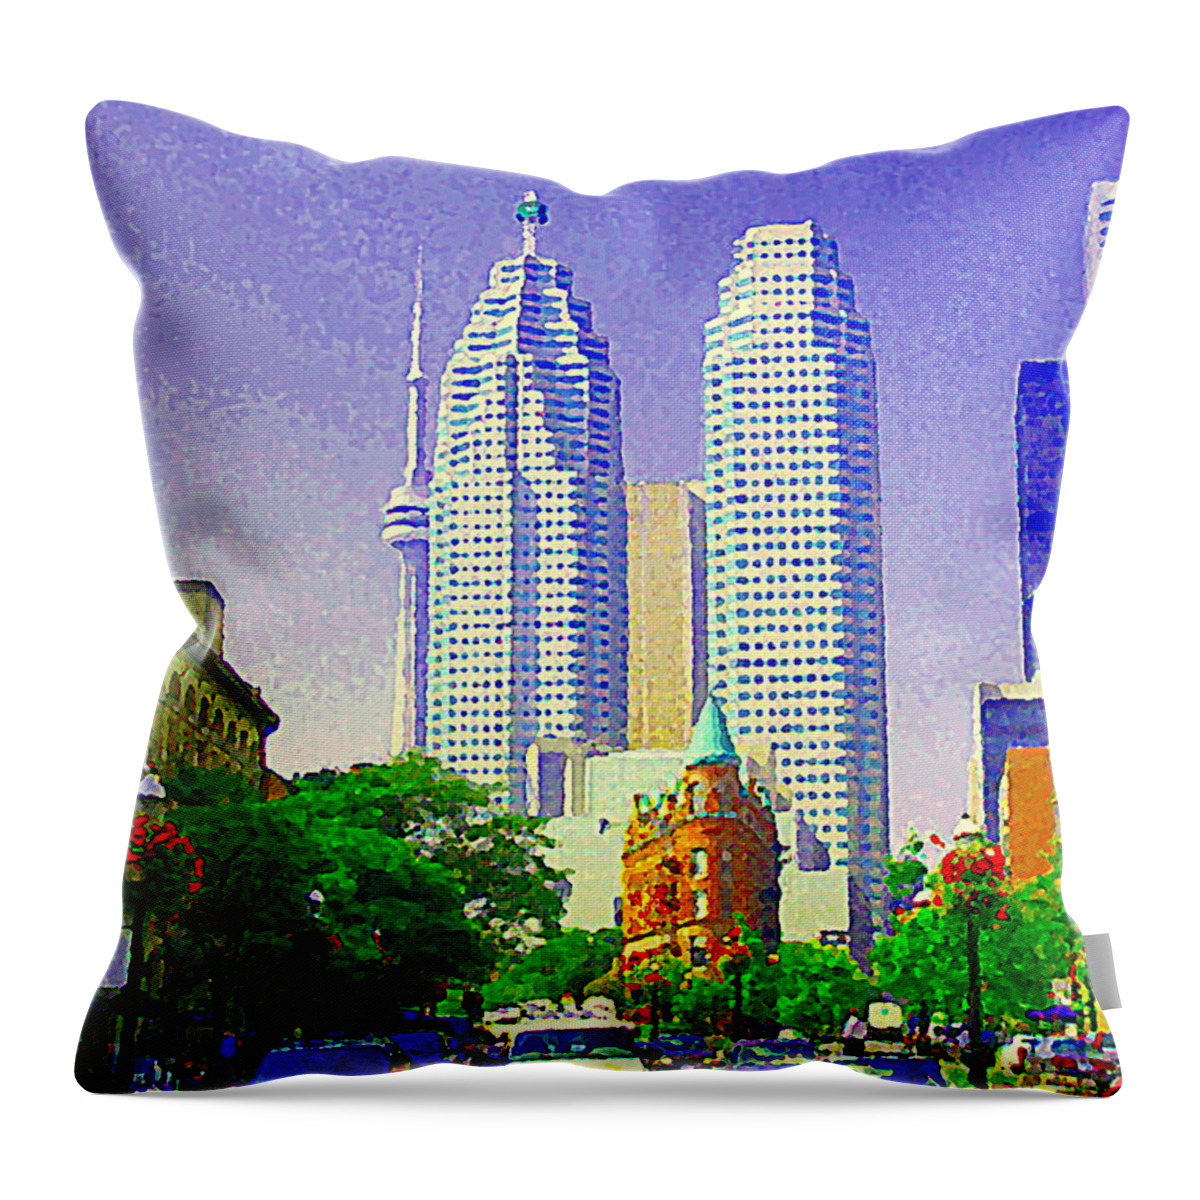 Toronto Throw Pillow featuring the painting Downtown Core Flatiron Building And Cn Tower Toronto City Scenes Paintings Canadian Art Cspandau by Carole Spandau